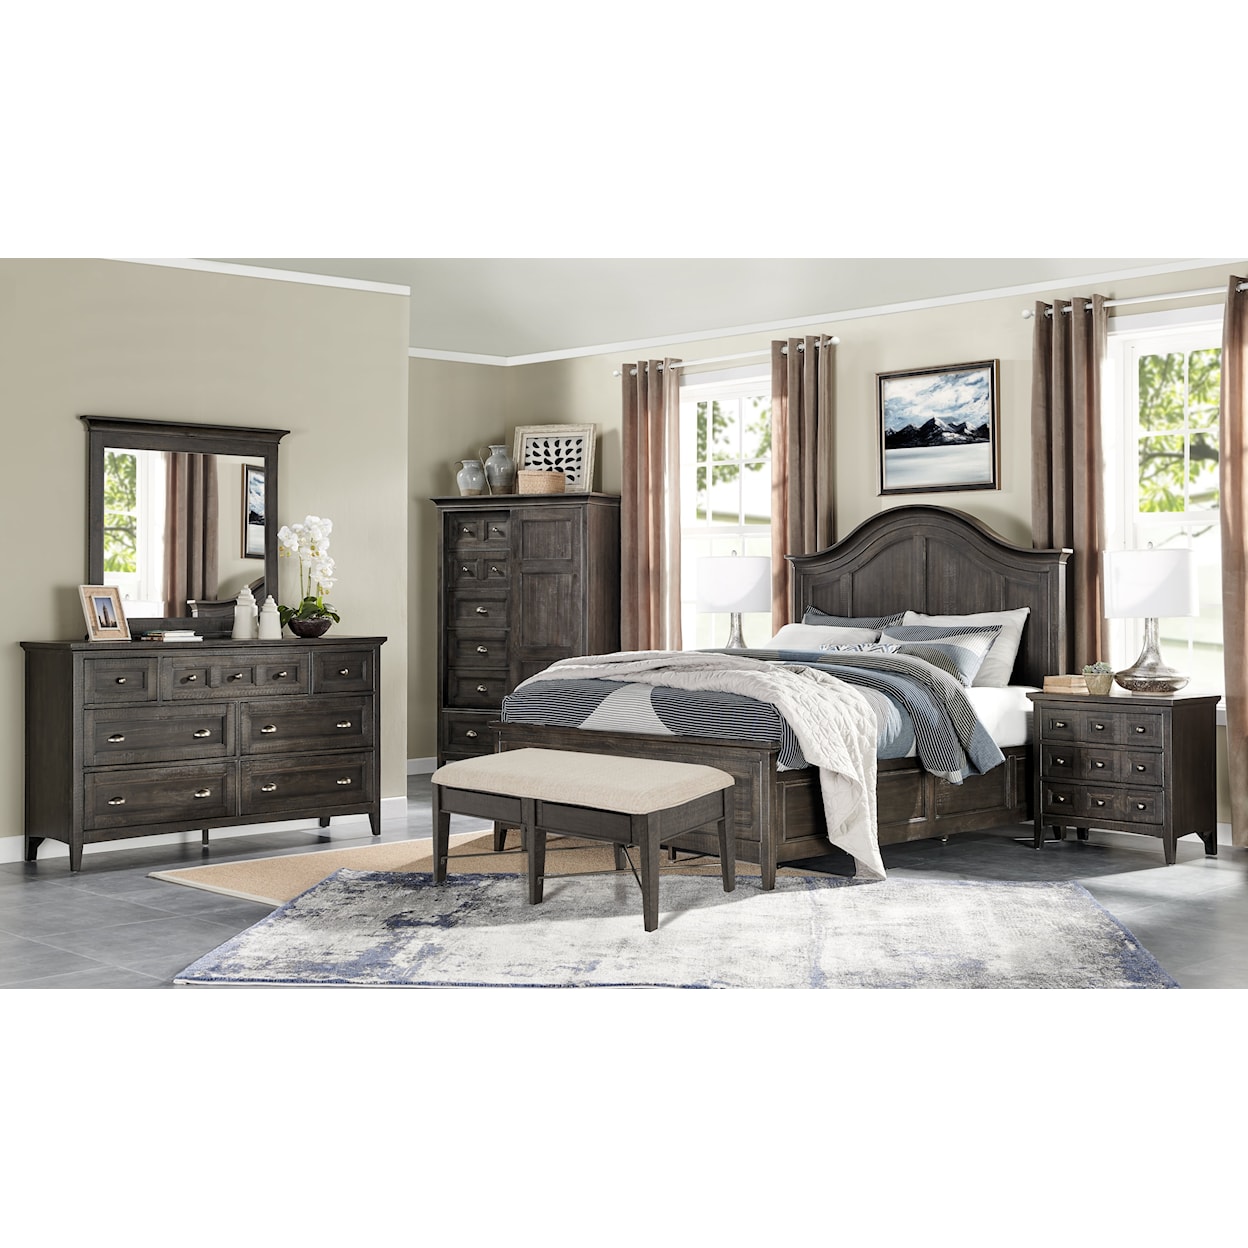 Magnussen Home Westley Falls Bedroom California King Arched Bed